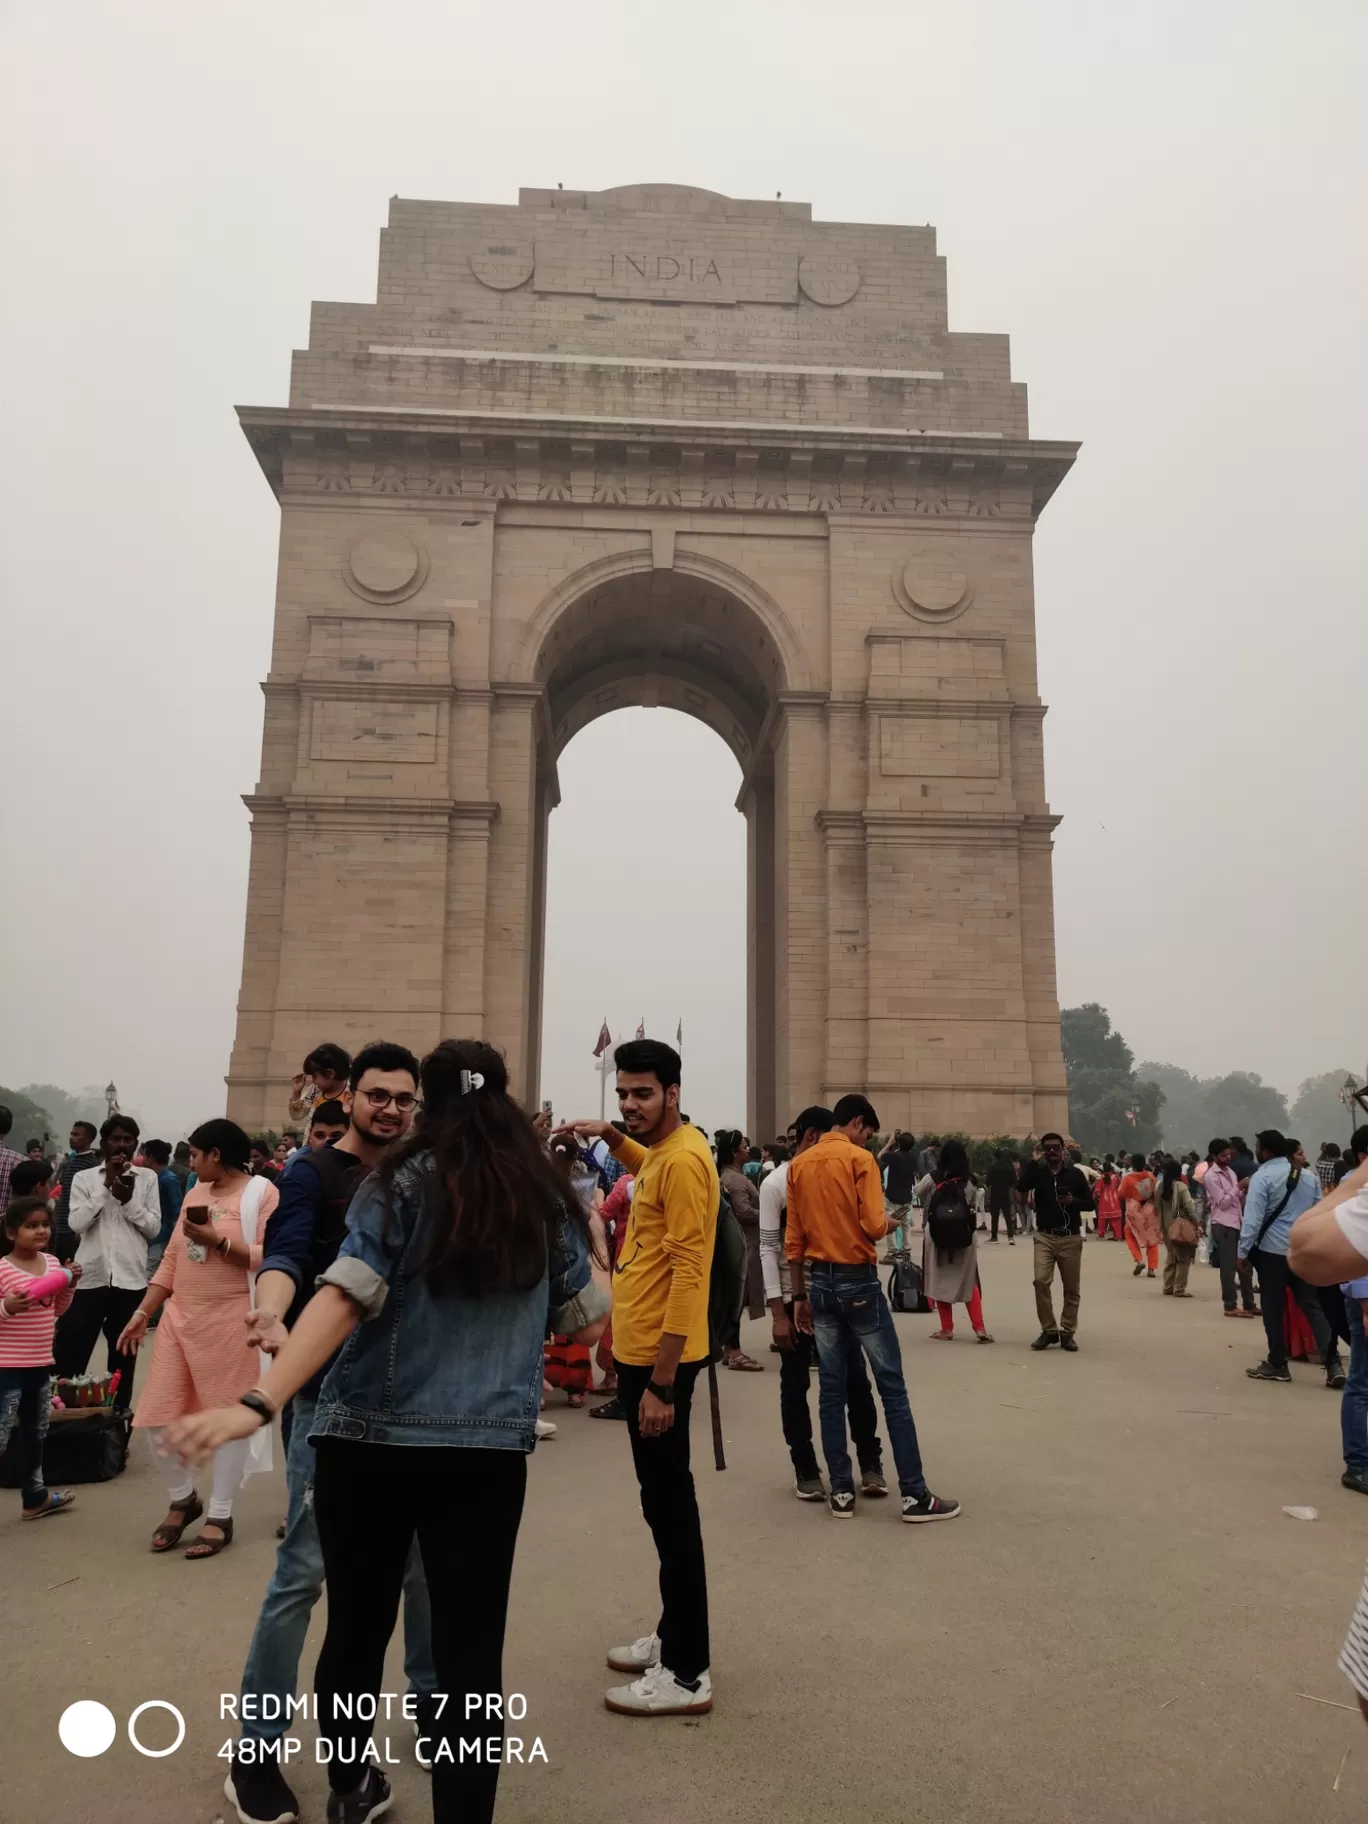 Photo of India Gate By keay Vlogger